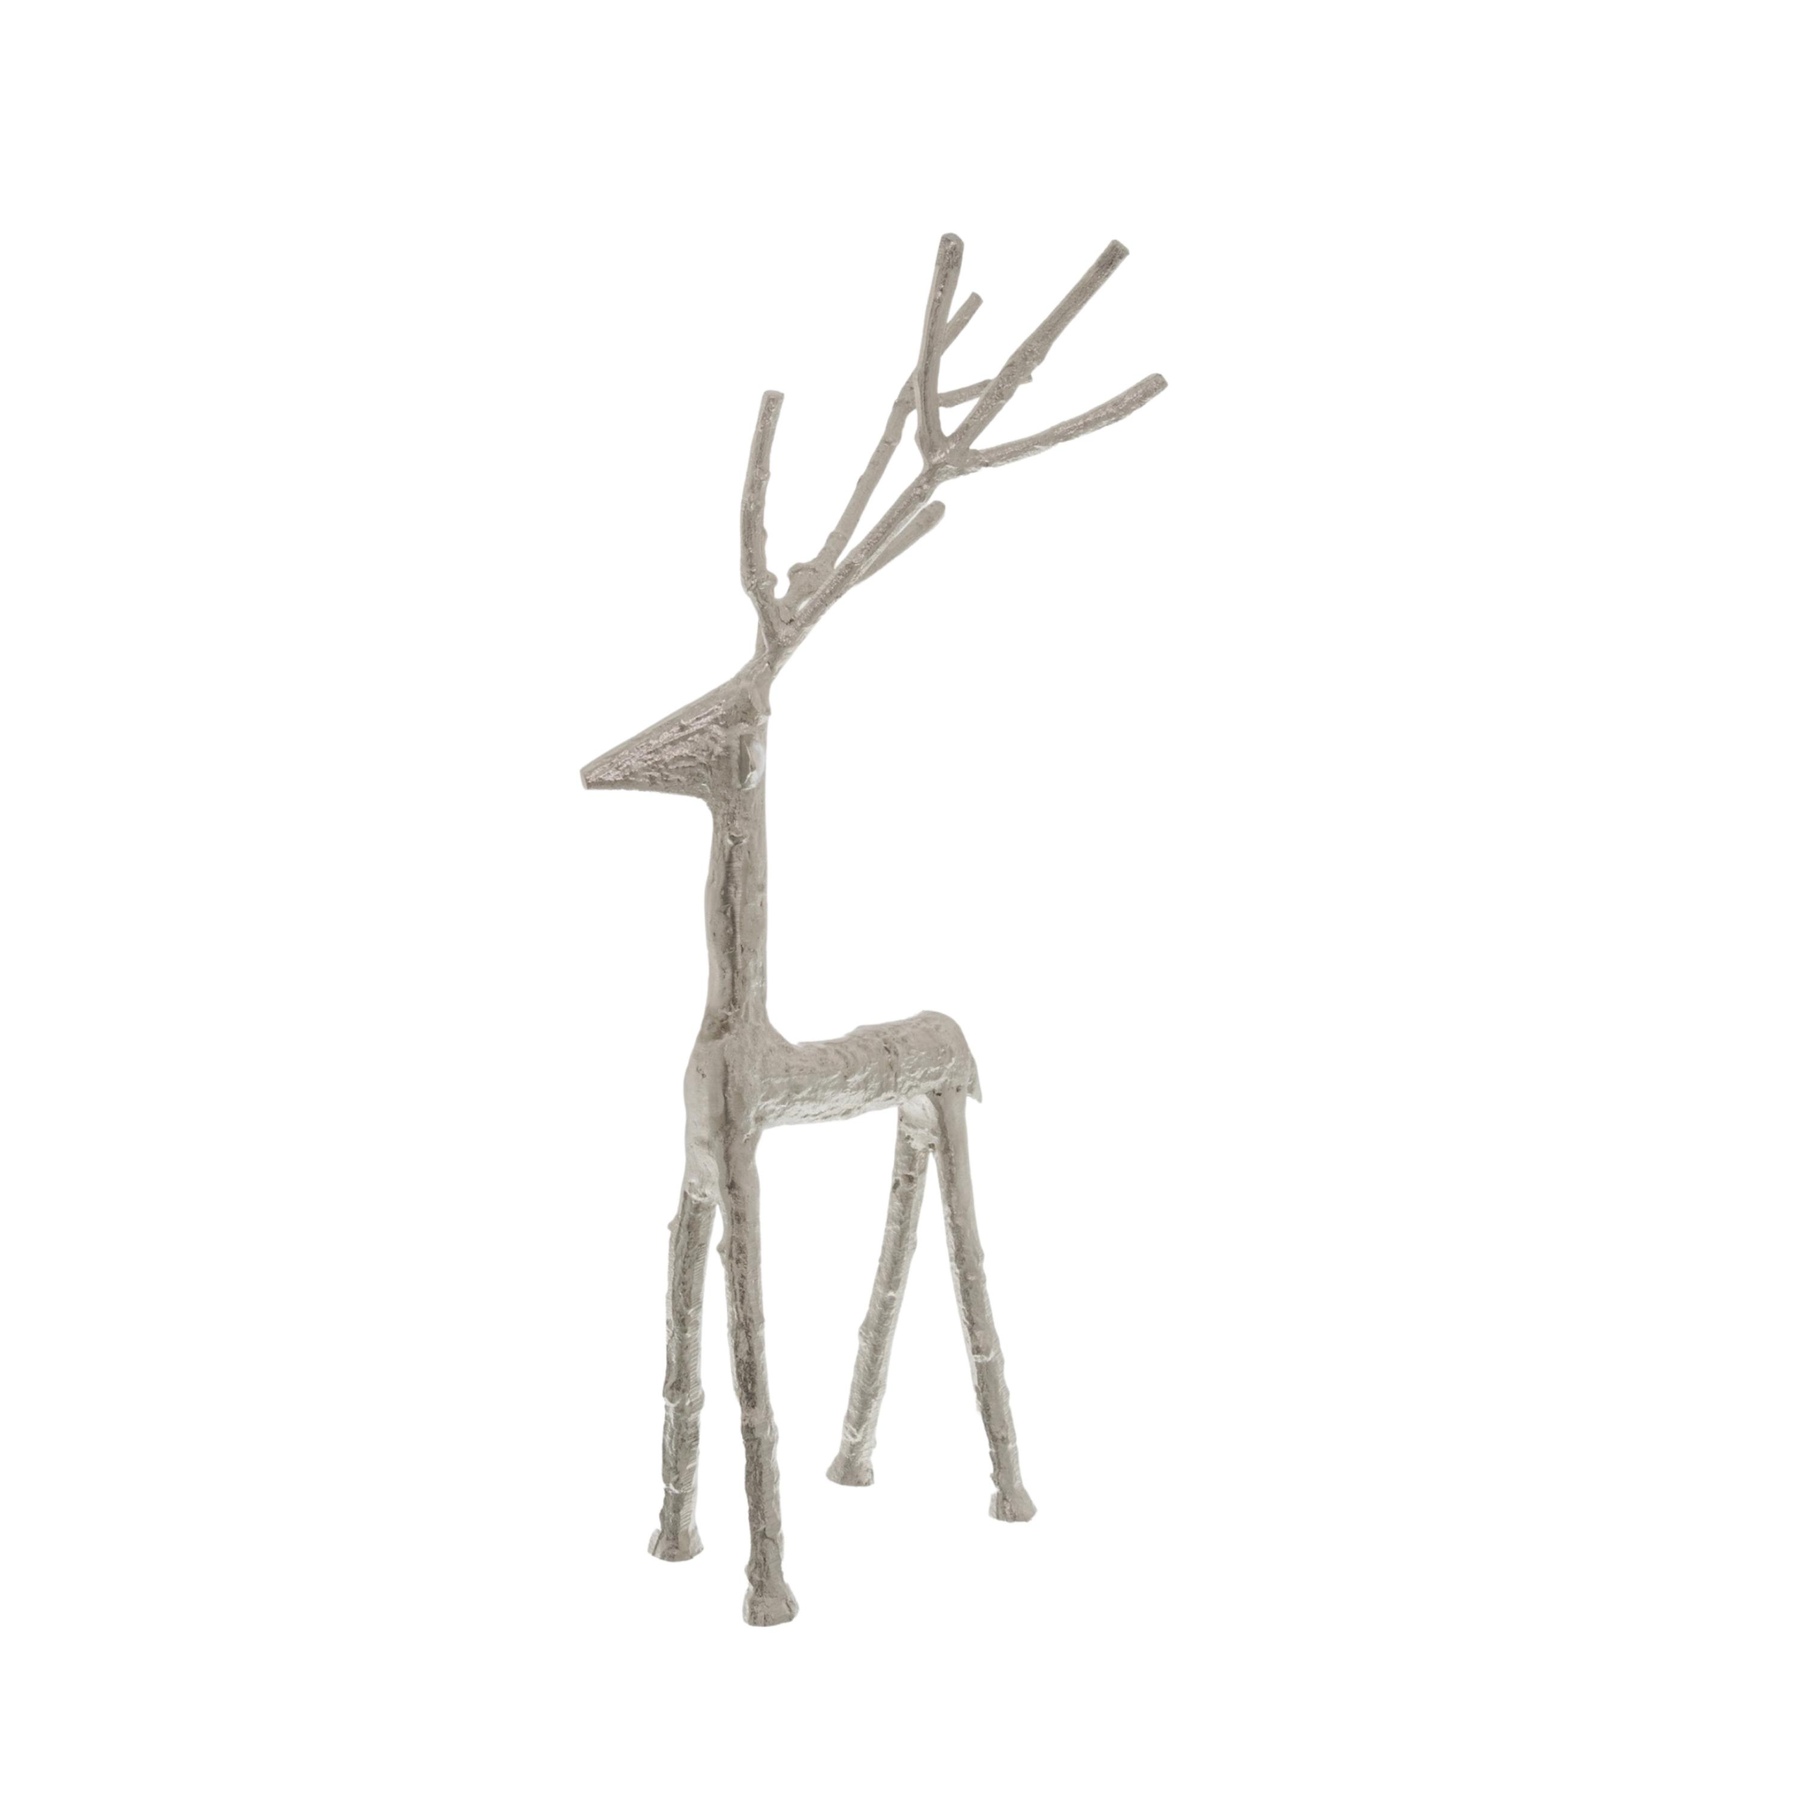 Small Silver Standing Stag Ornament - Image 1